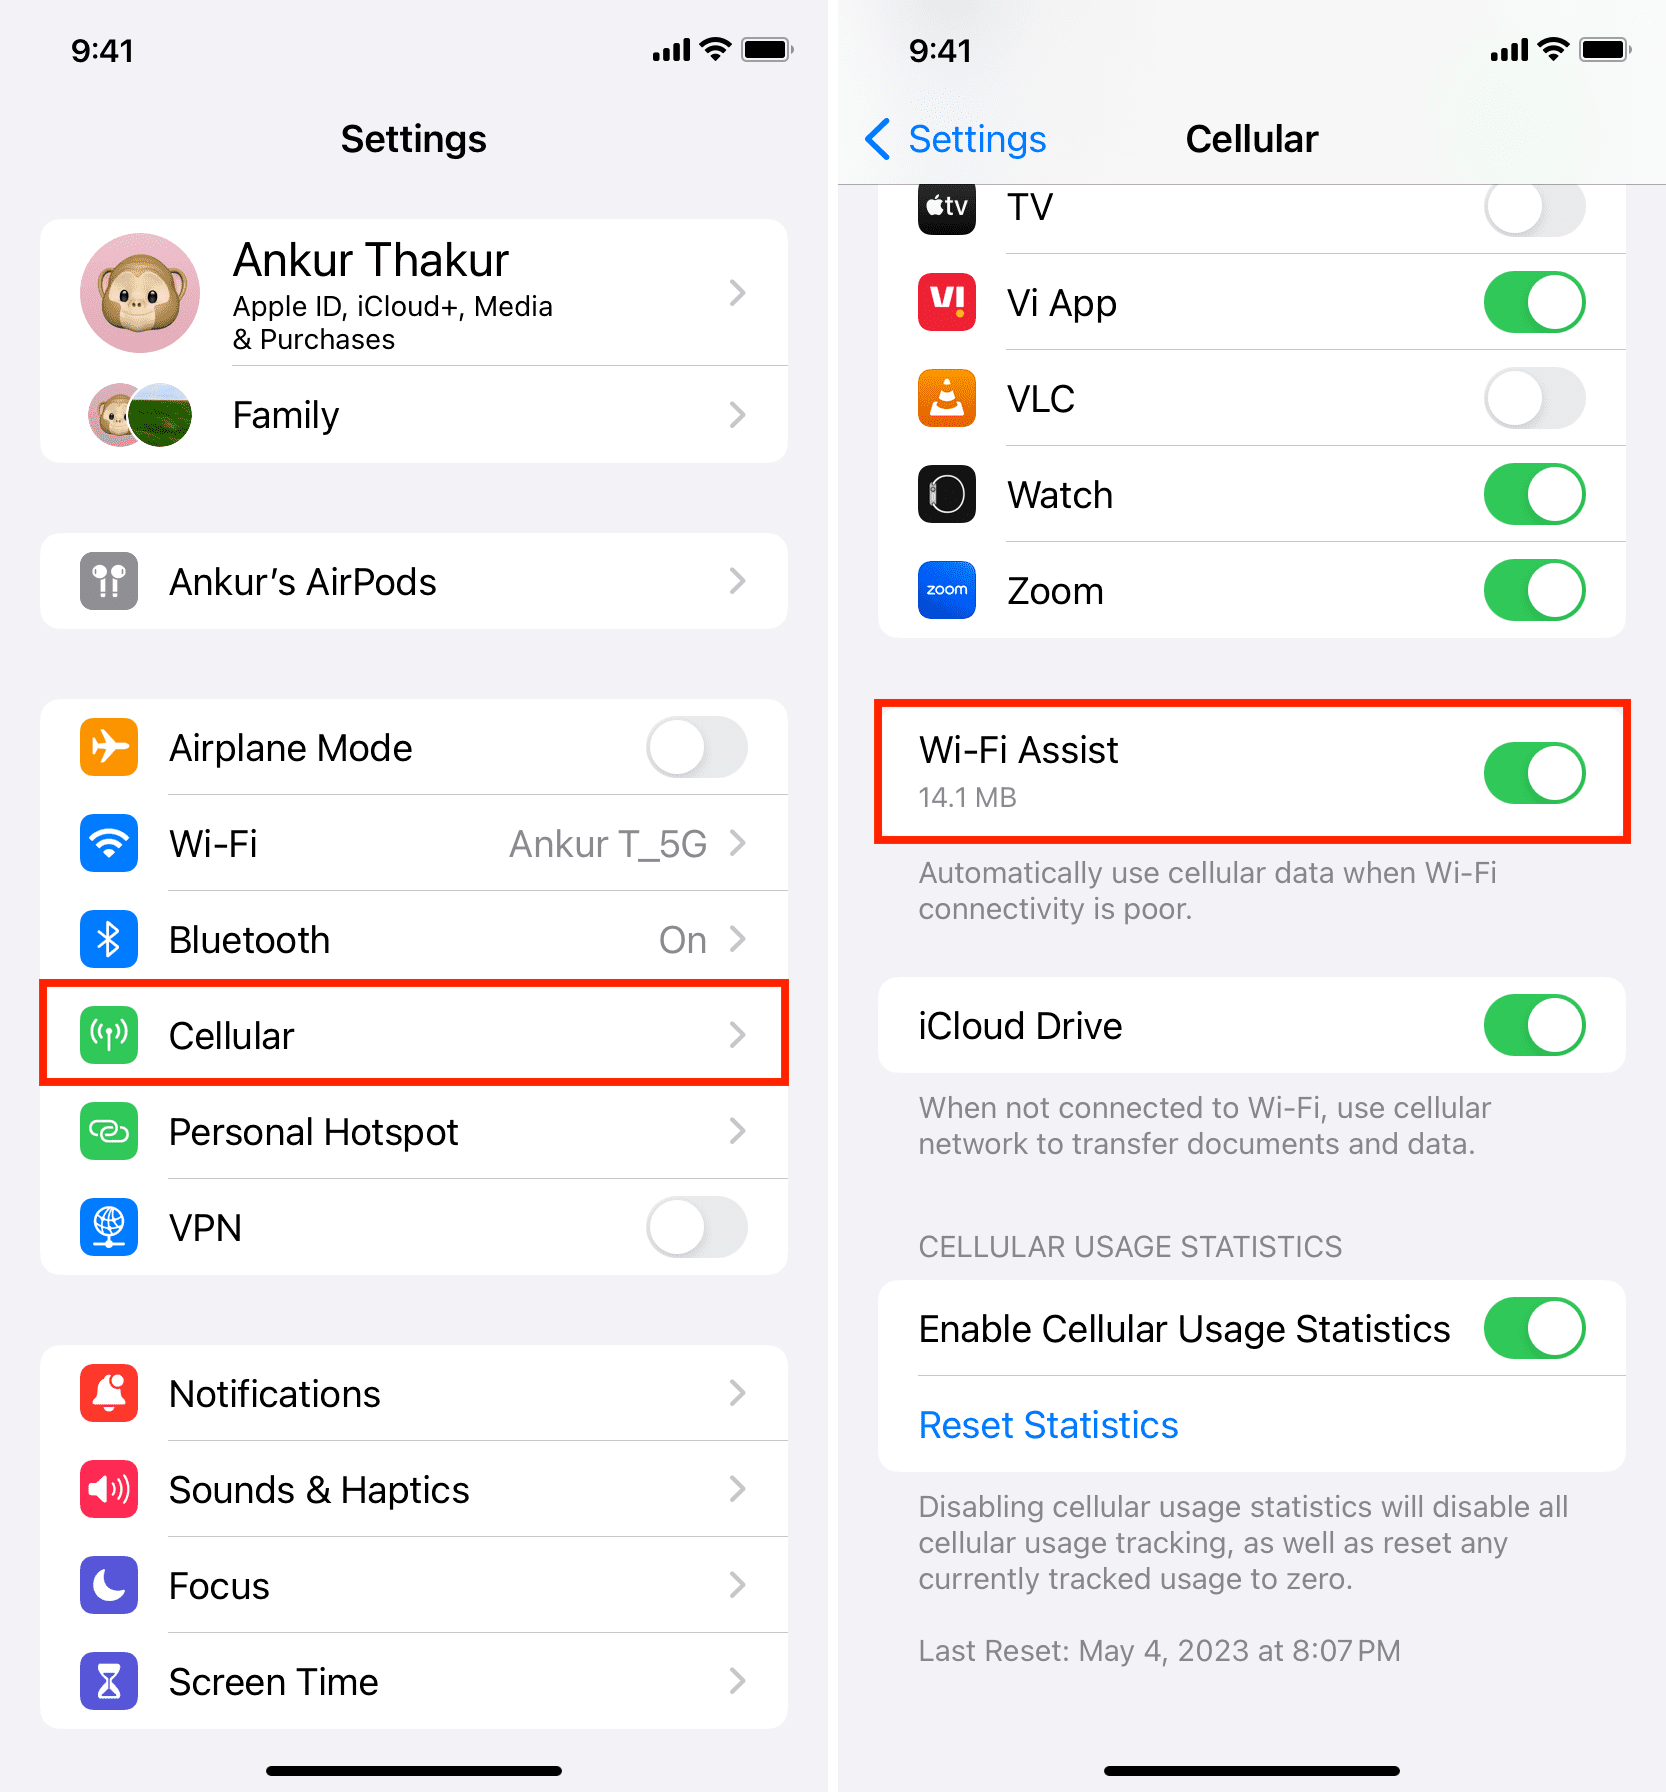 Turn on Wi-Fi Assist from iPhone Cellular settings